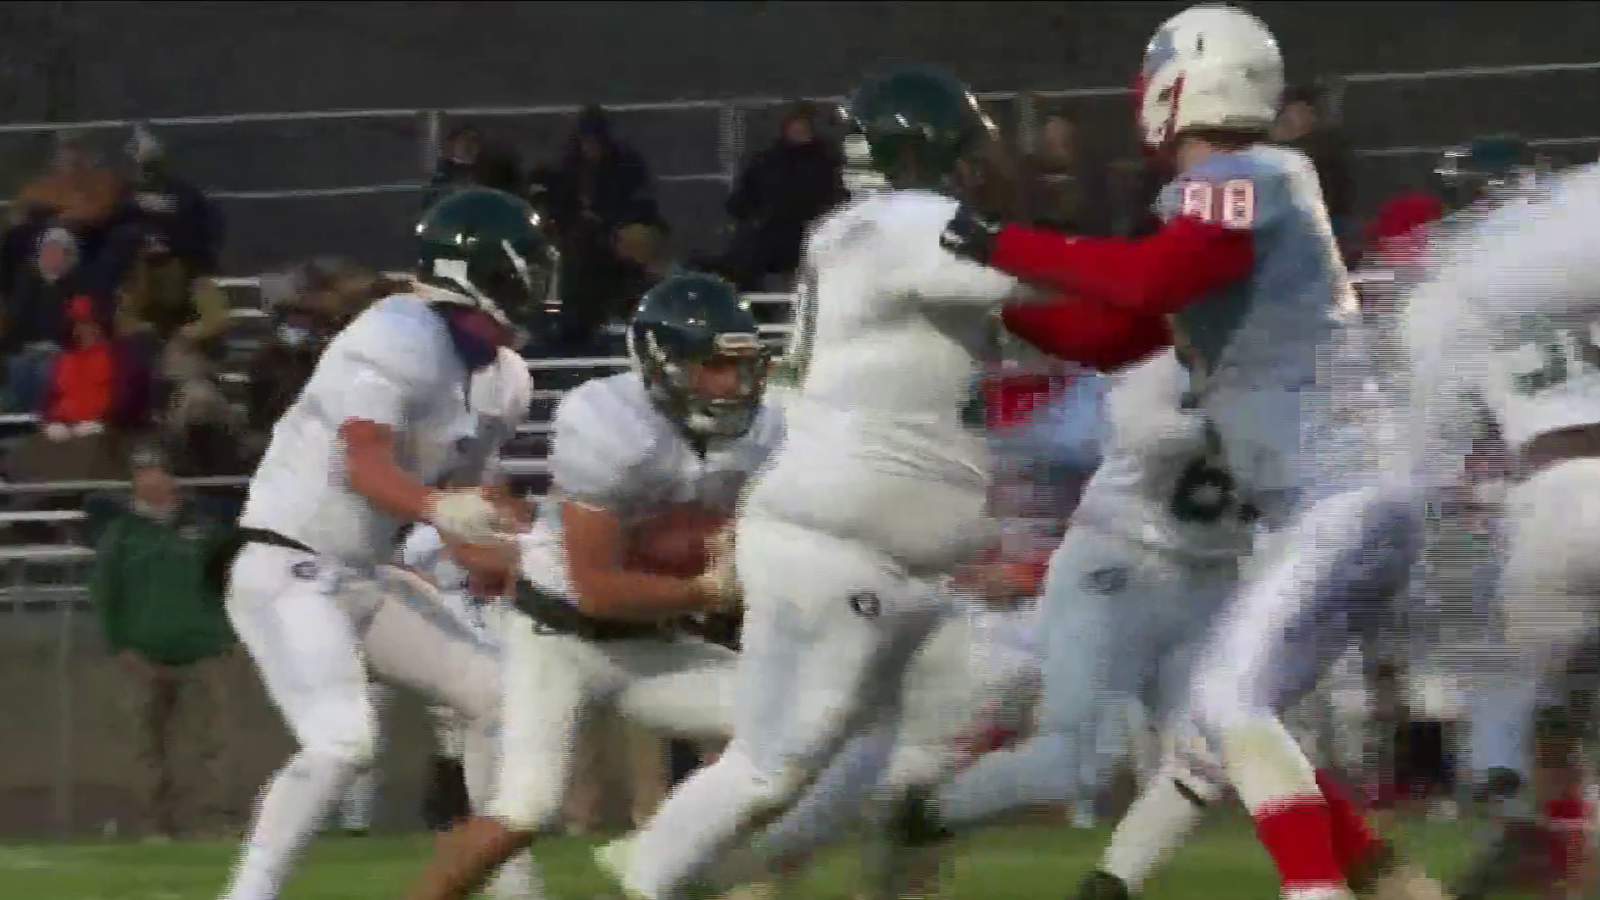 Glenvar secures playoff spot in shutout win against Alleghany